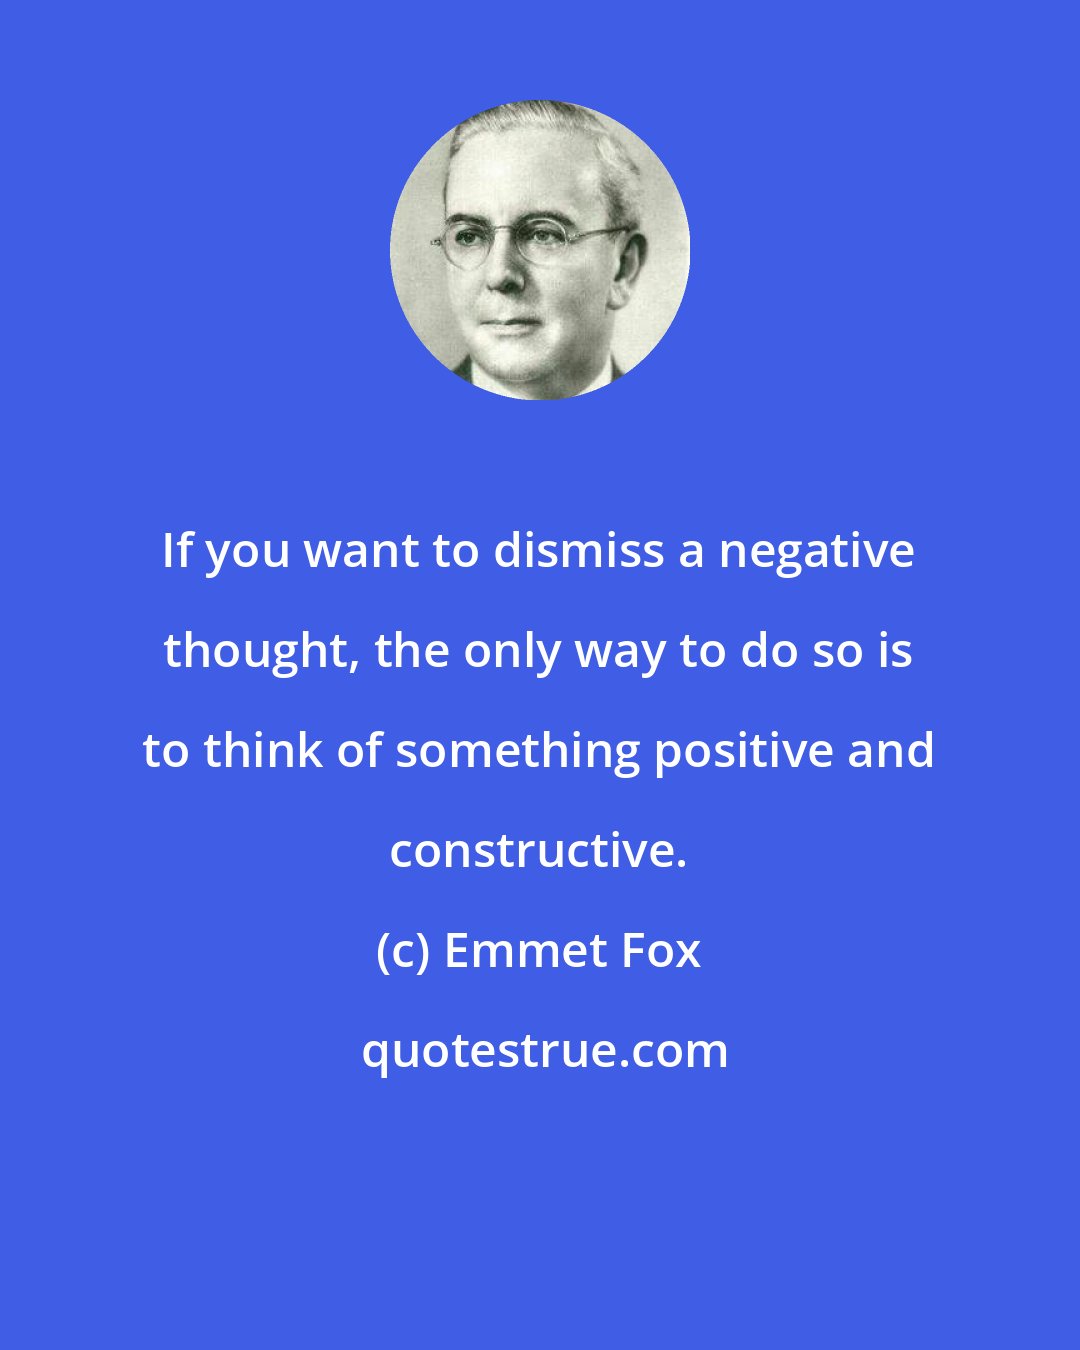 Emmet Fox: If you want to dismiss a negative thought, the only way to do so is to think of something positive and constructive.